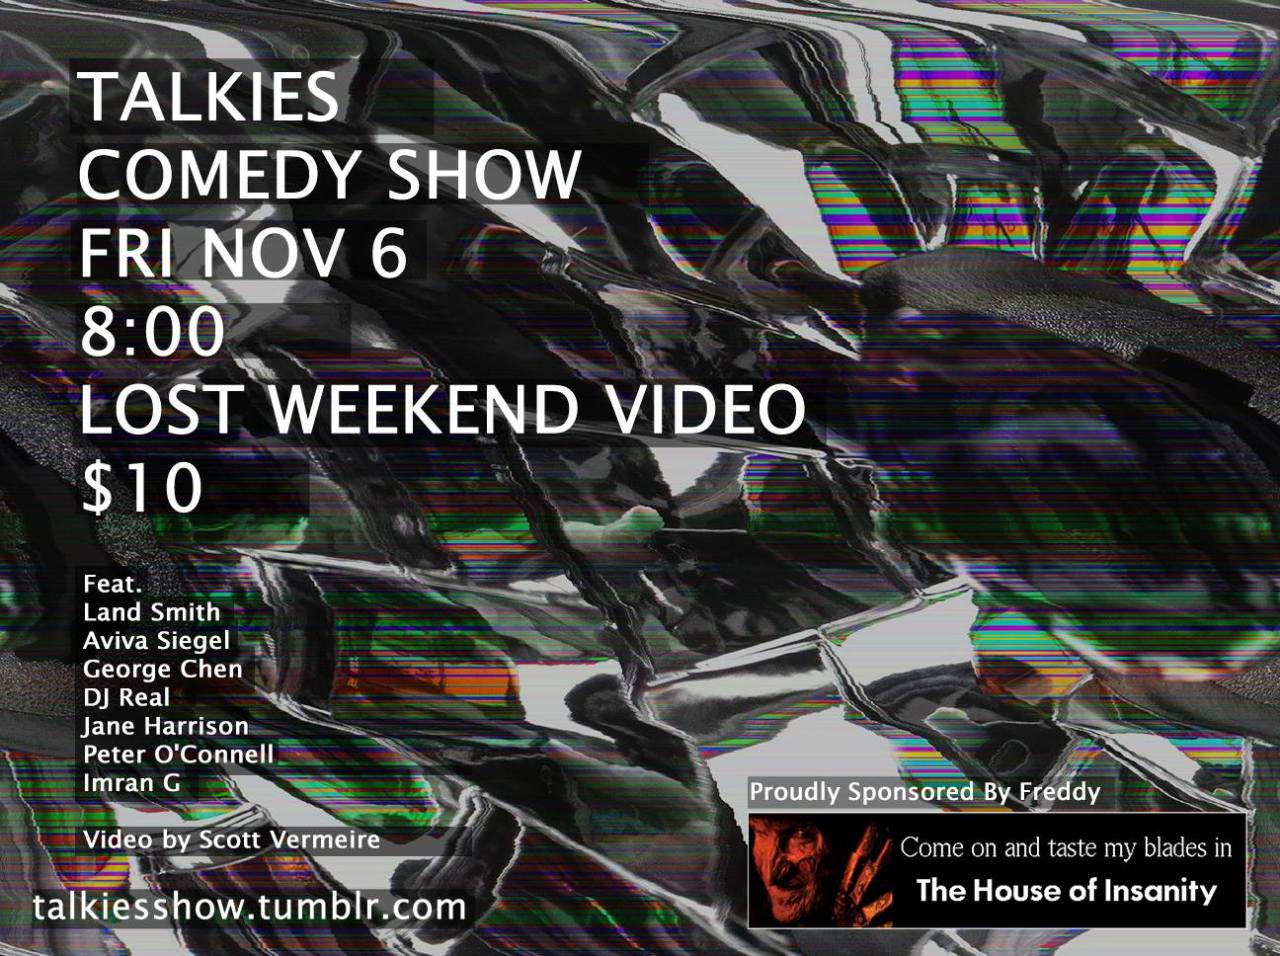 talkiesshow:
“ Our Monthly First Friday Comedy show featuring video, powerpoint, and characters
Land Smith
Aviva Siegel
DJ Real
George Chen
Jane Harrison
Peter O’Connell
Imran G
Lost Weekend Video 1034 Valencia Street, SF
$10 8 pm
21+
”